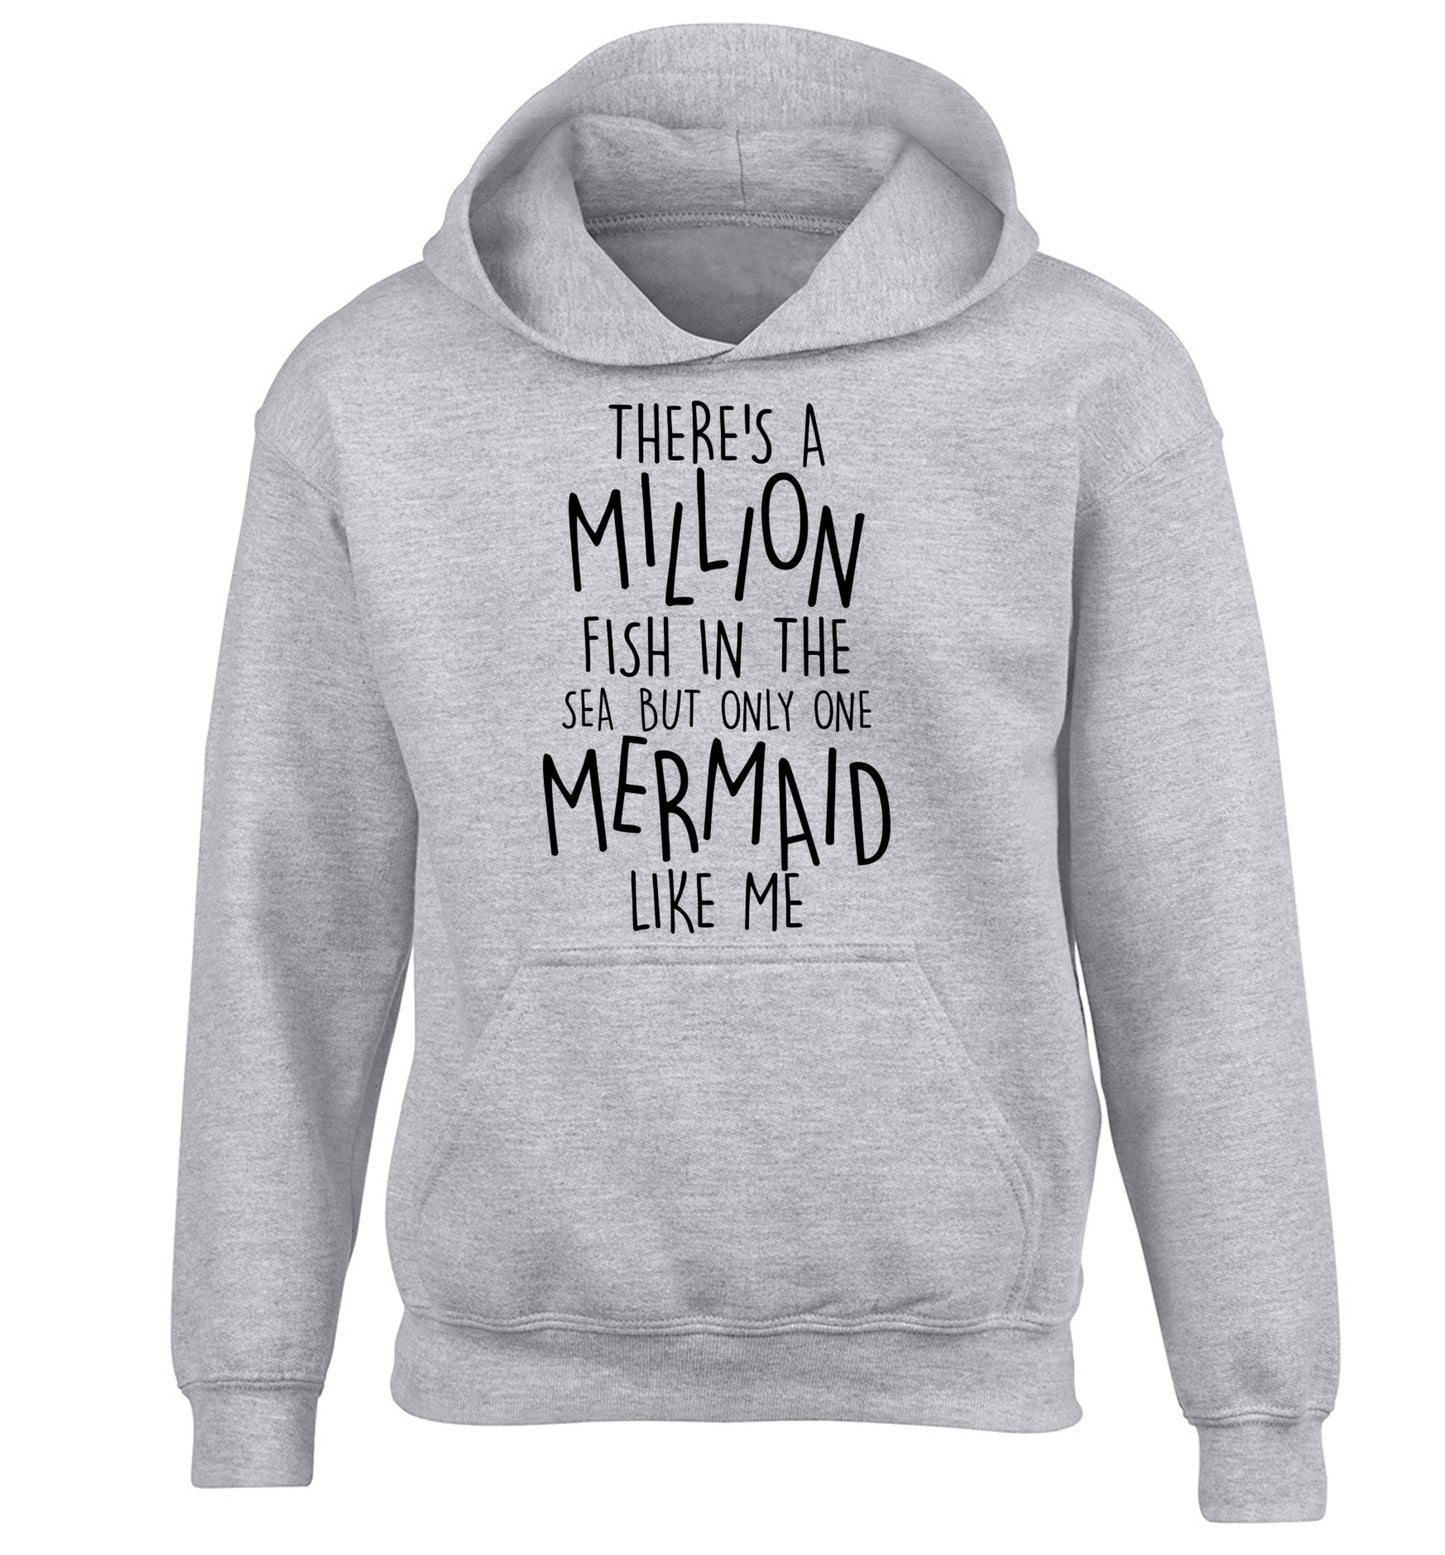 There's a million fish in the sea but only one mermaid like me children's grey hoodie 12-13 Years